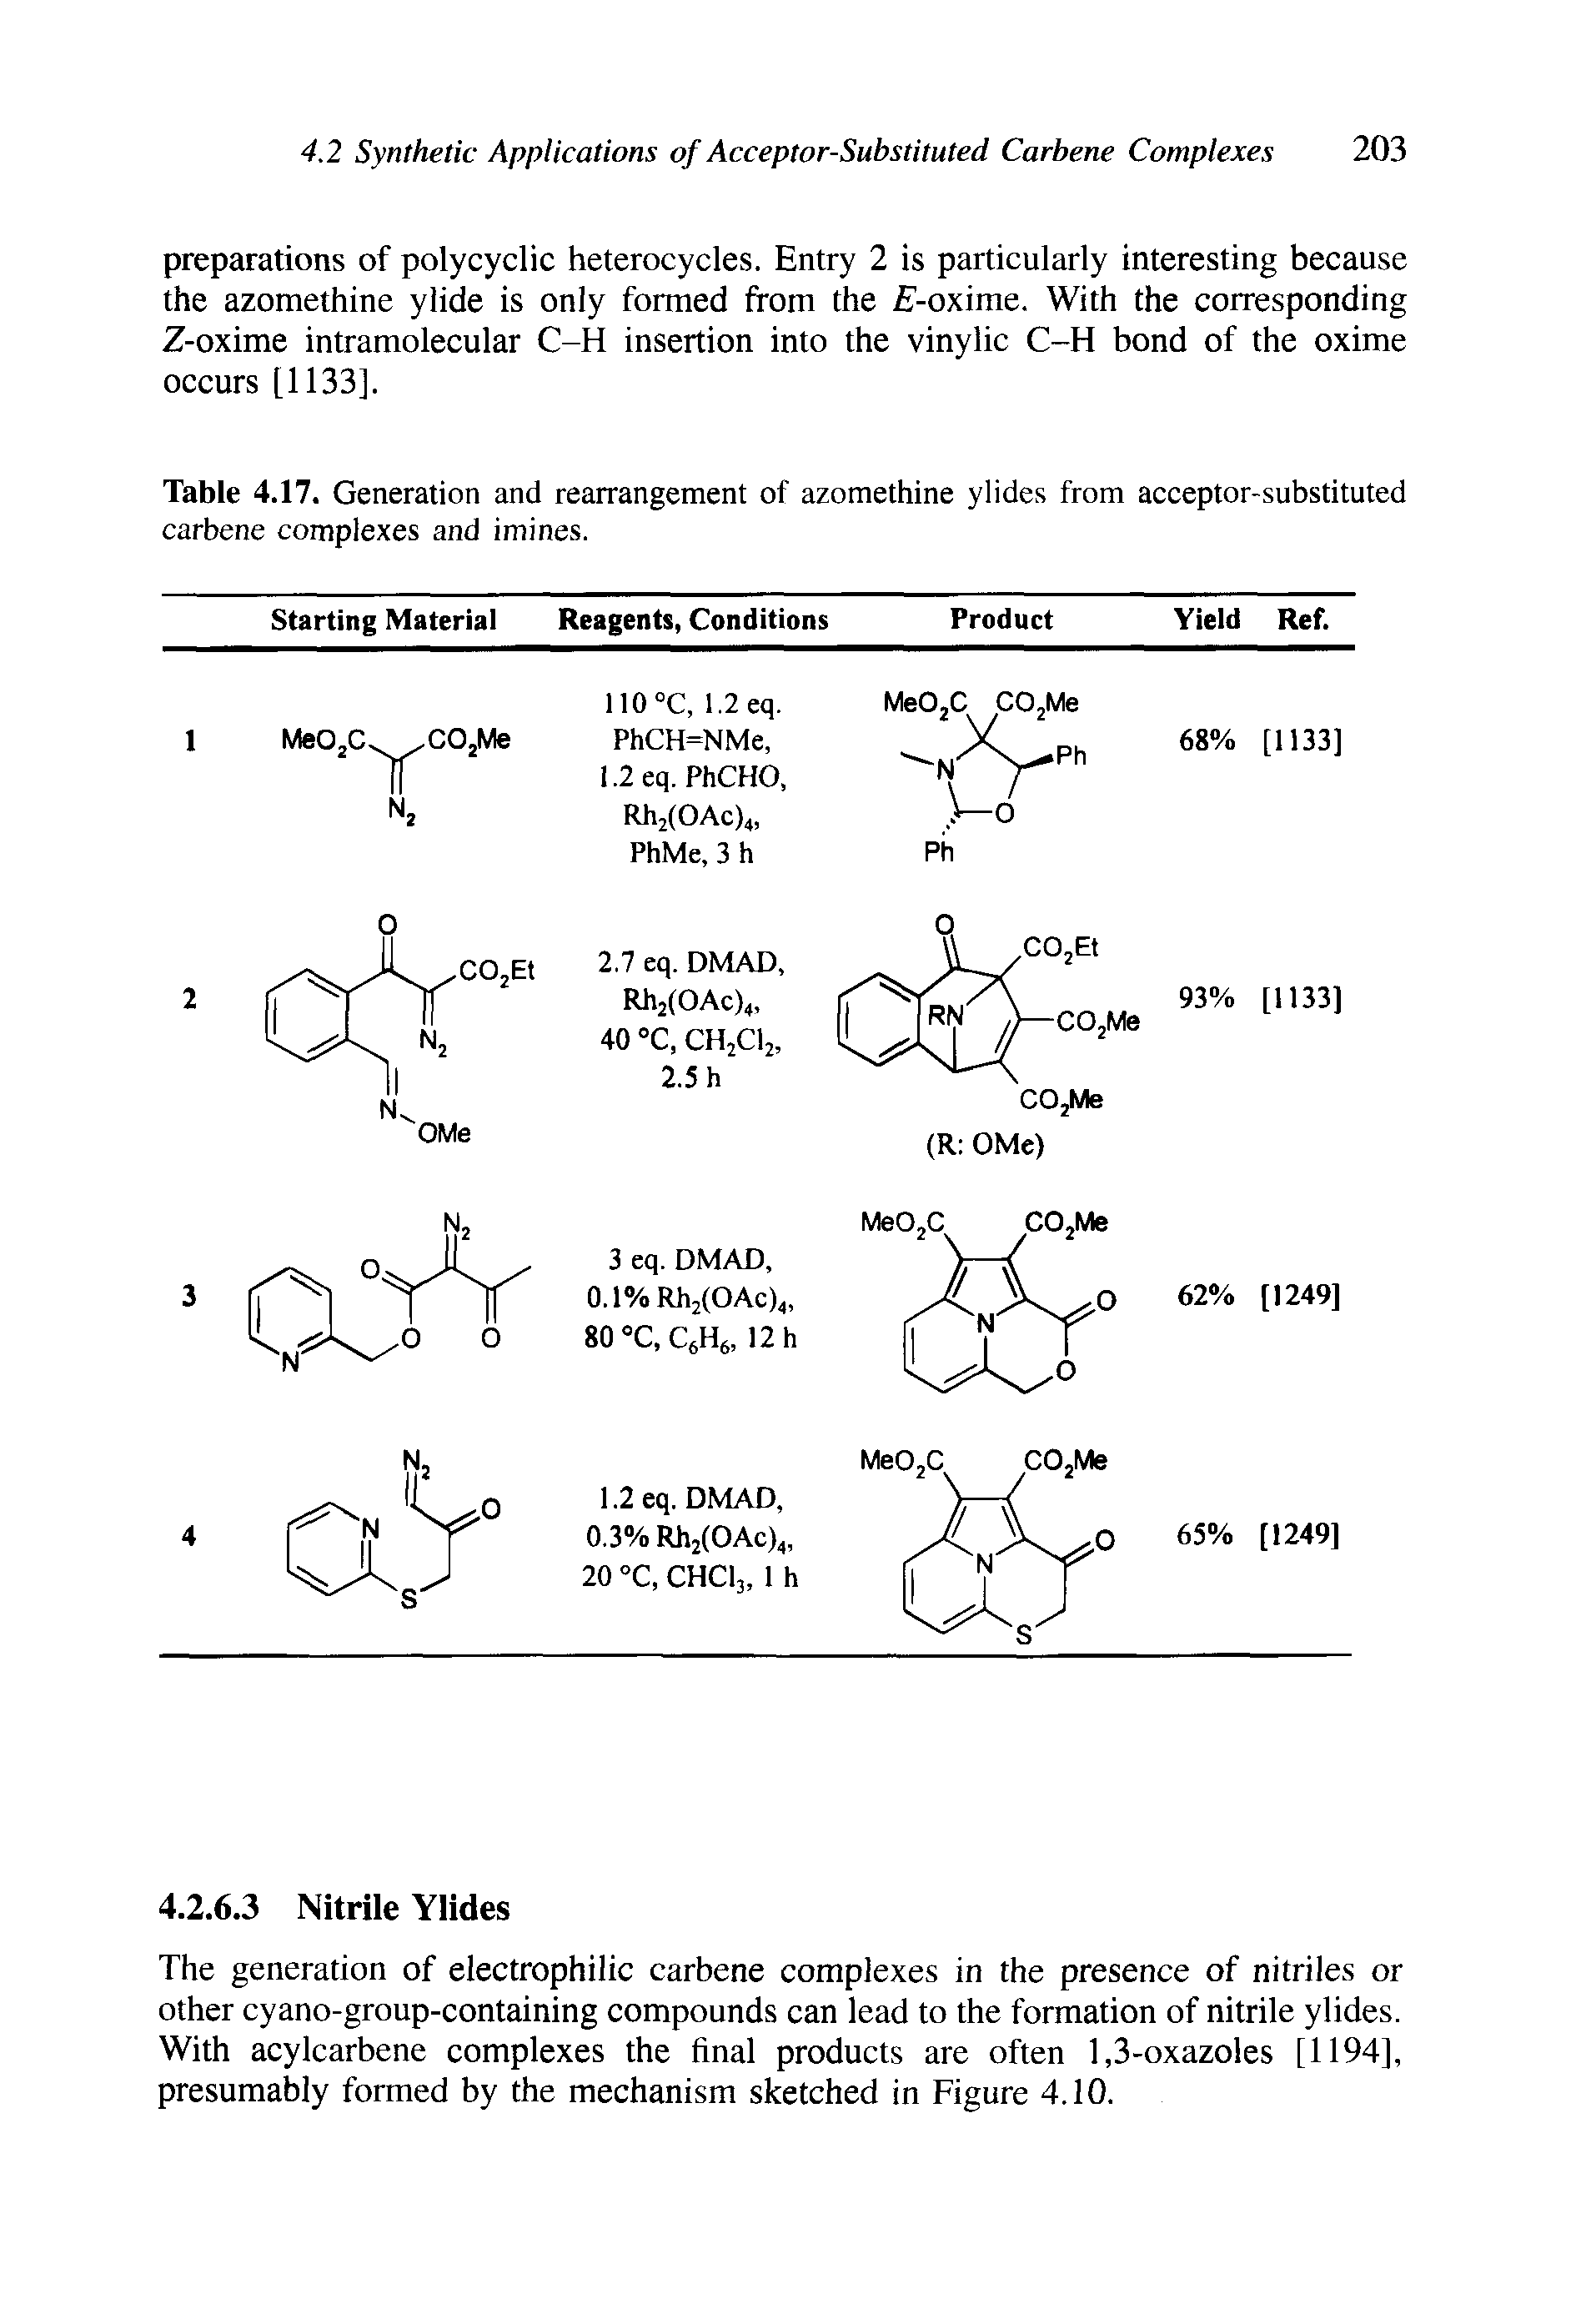 Table 4.17. Generation and rearrangement of azomethine ylides from acceptor-substituted carbene complexes and imines.